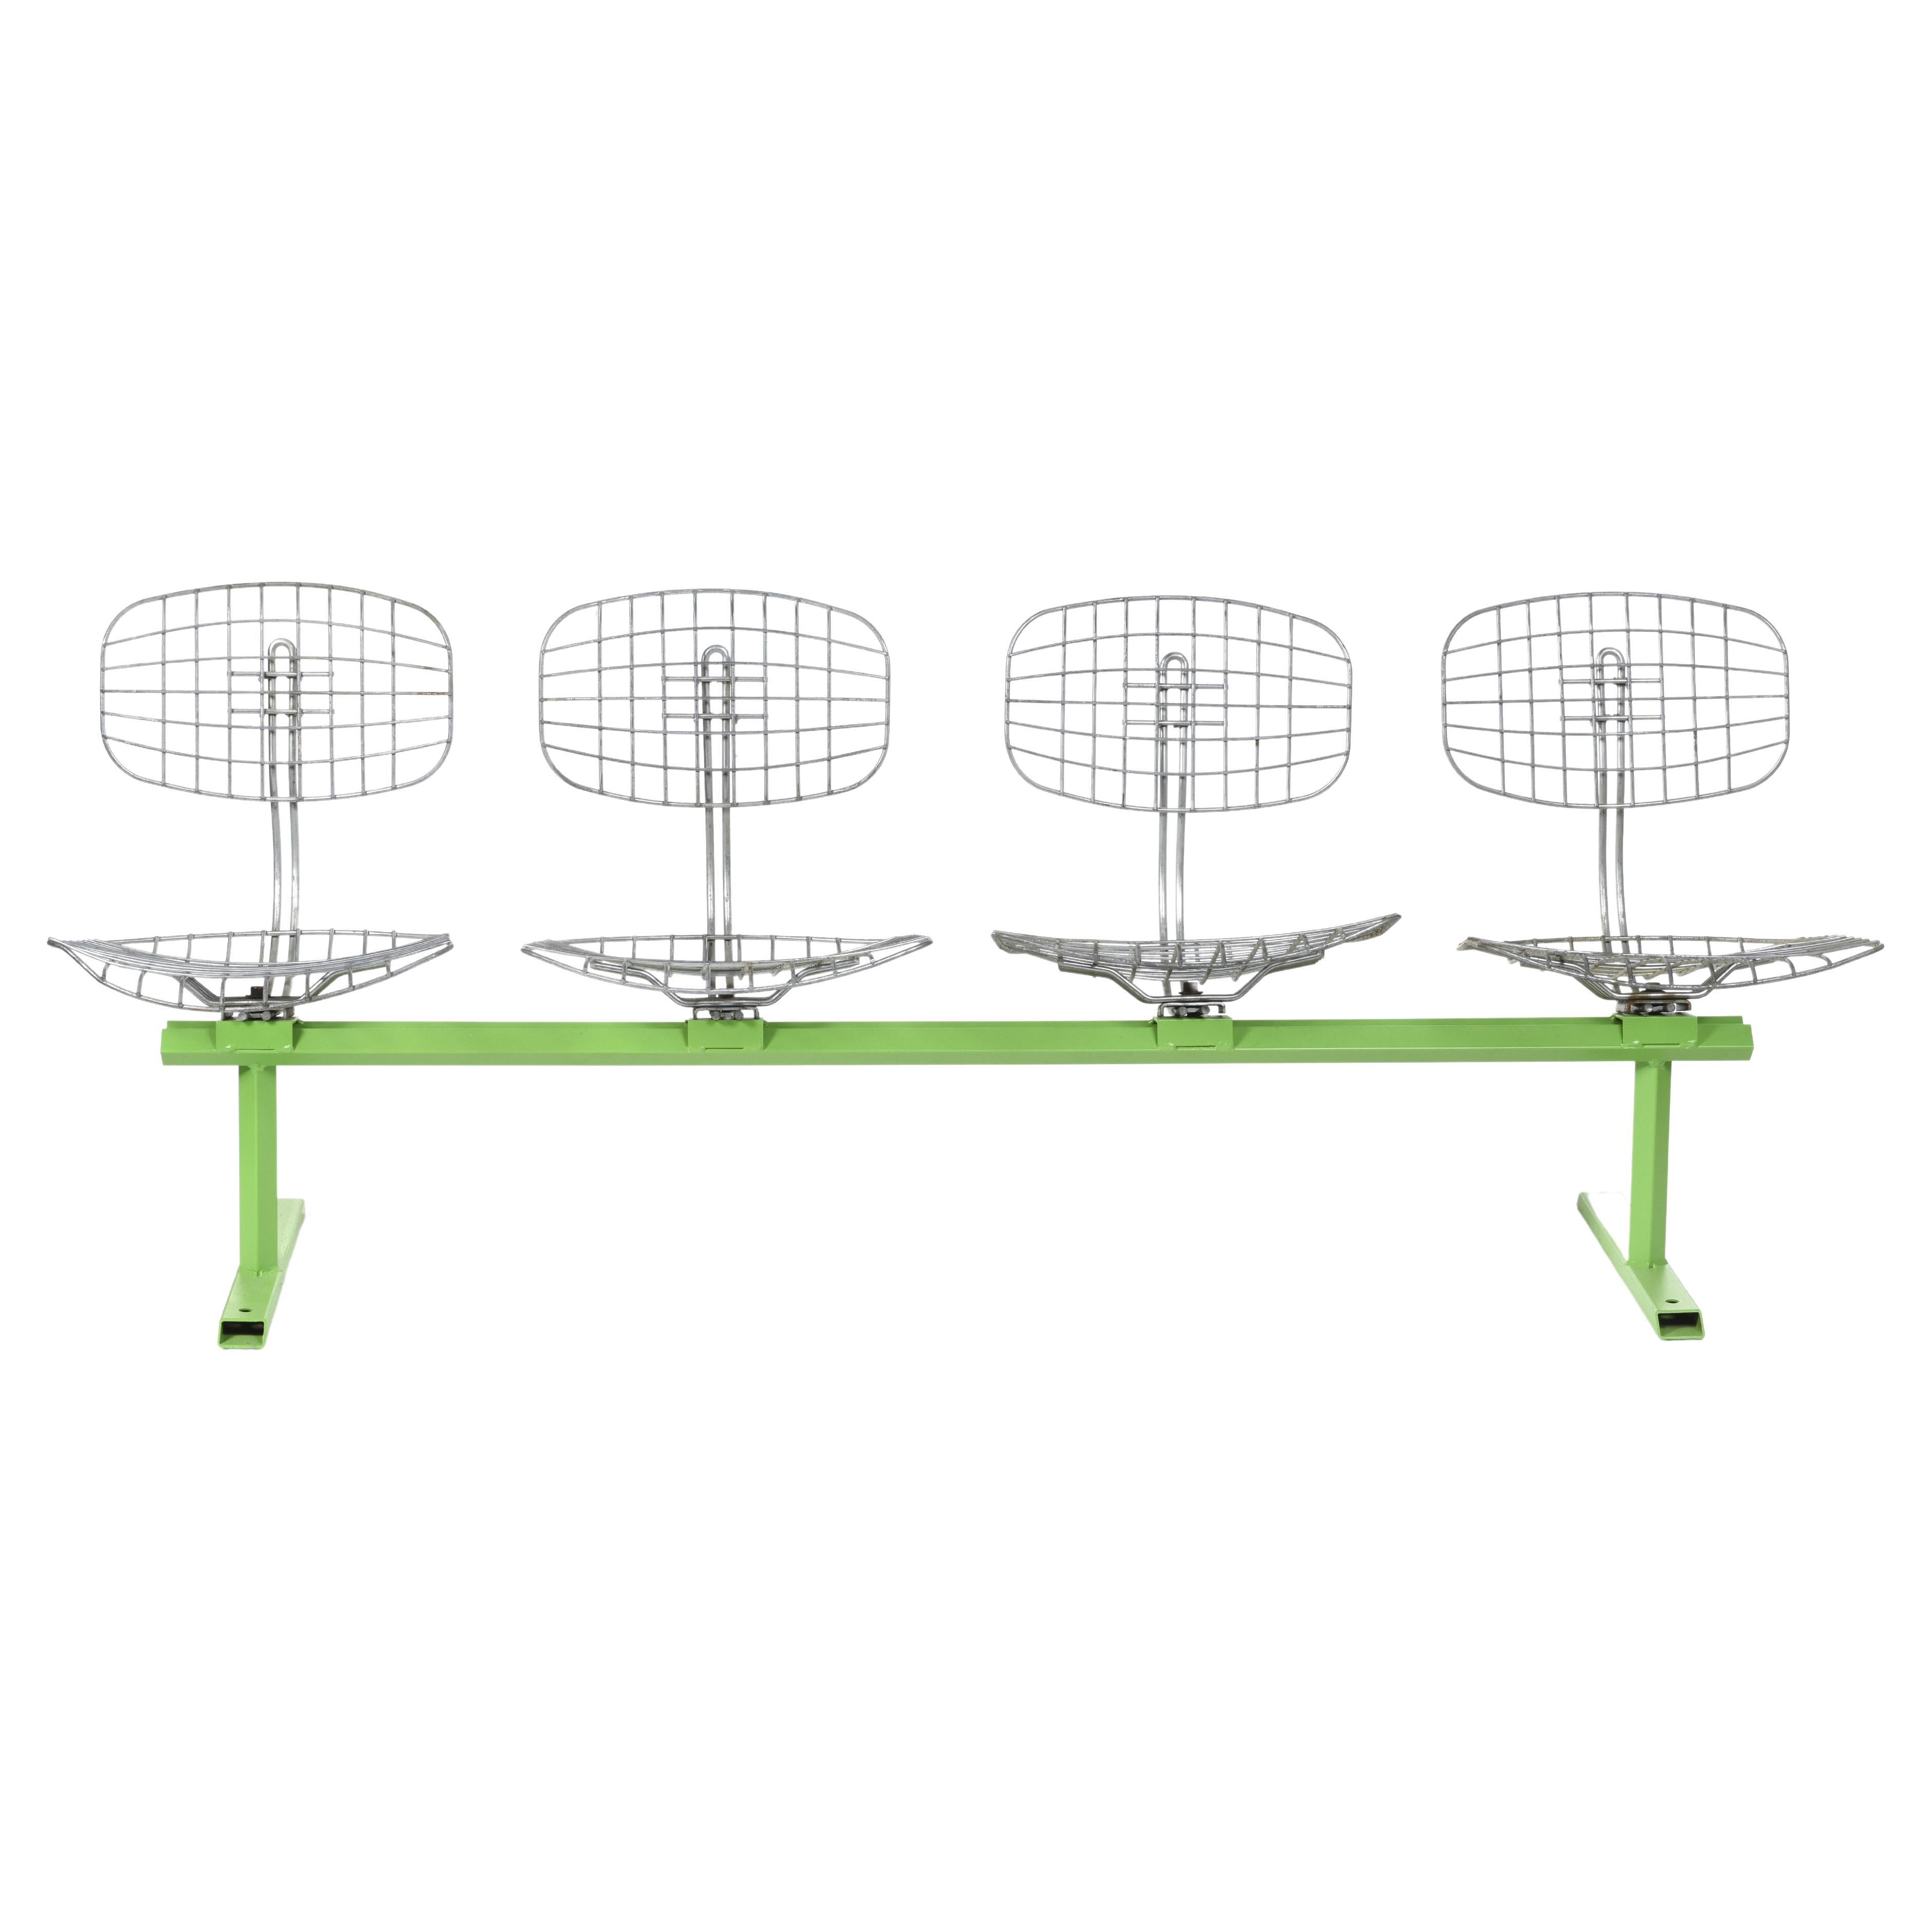 Michel Cadestin: Beaubourg Bench with 4 Seats, 1974 For Sale